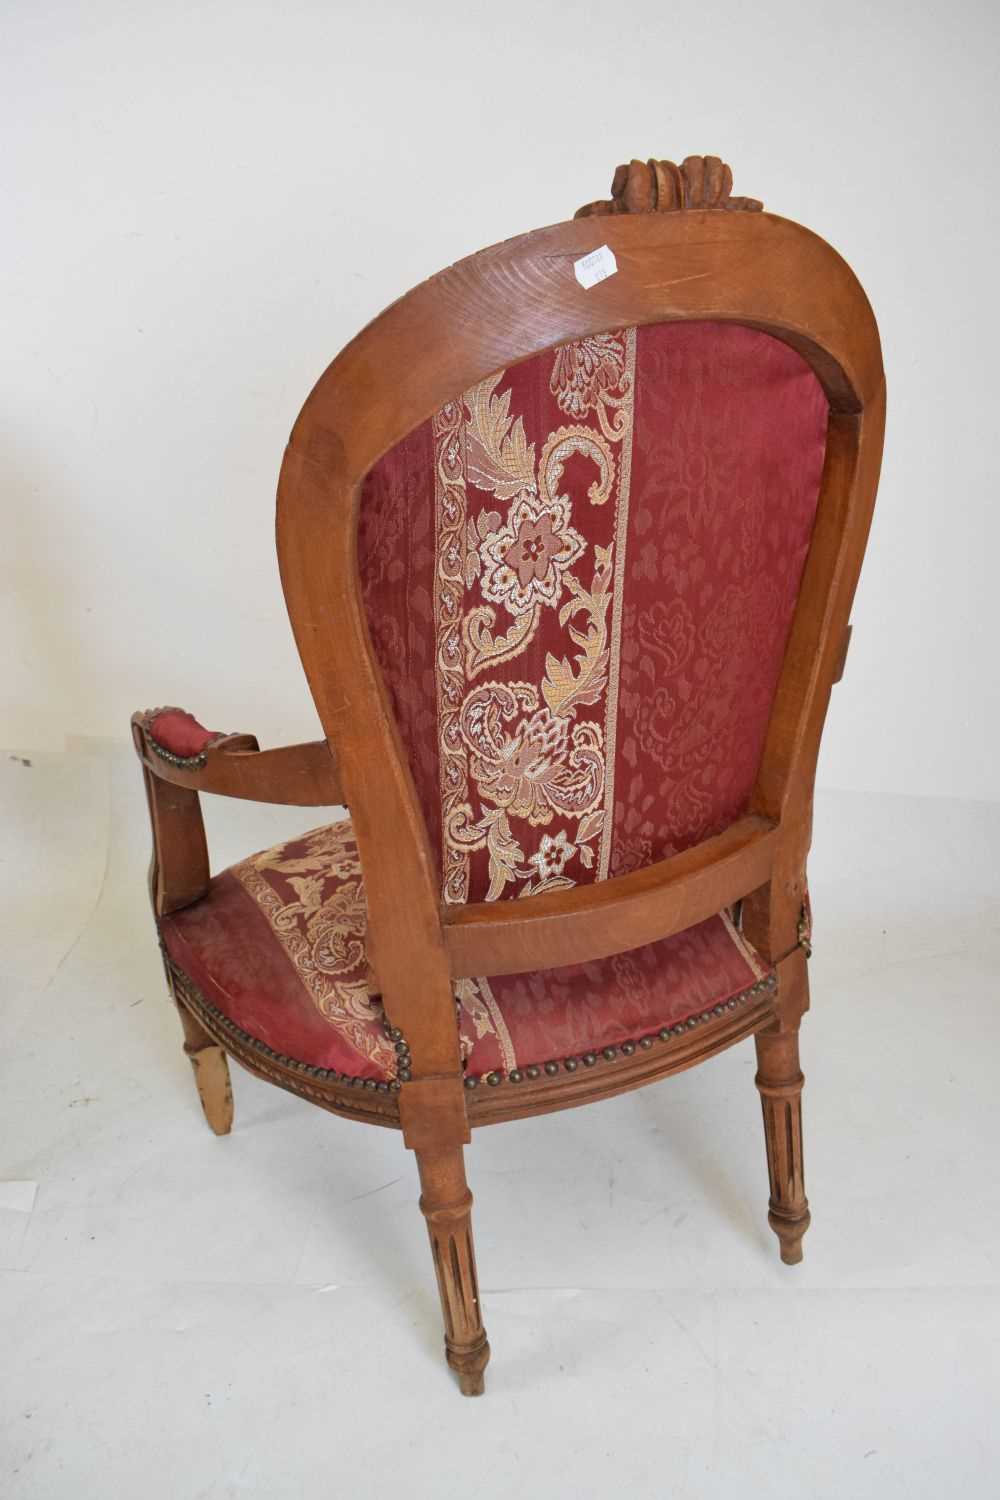 Pair of French style fauteuil chairs - Image 4 of 6